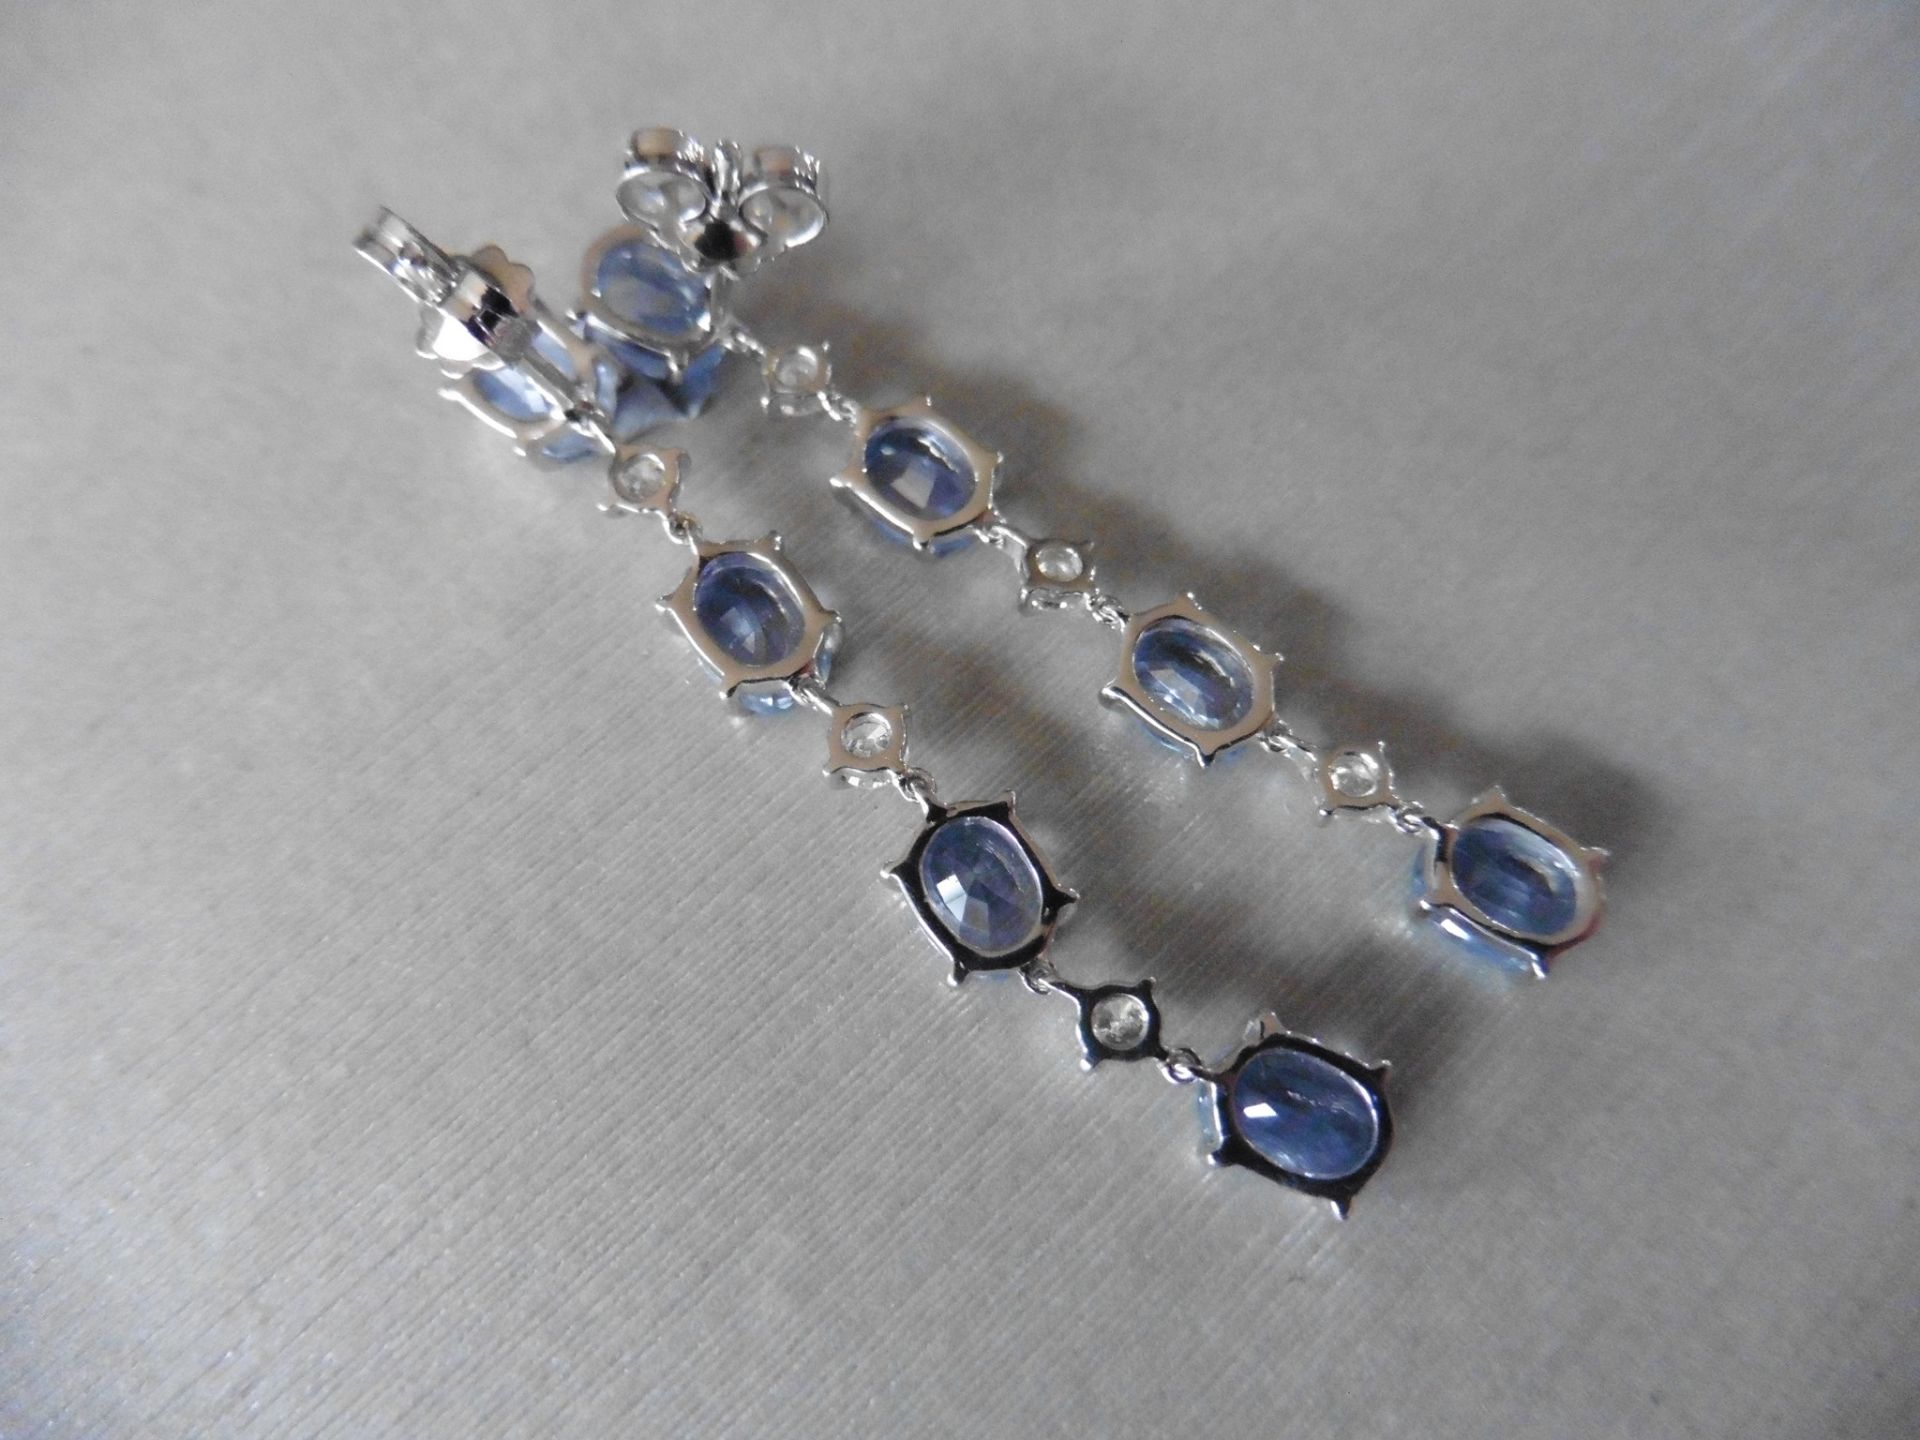 6ct ceylon sapphire and diamond drop earrings. Each set with 4 oval cut sapphires and 3 brilliant - Image 2 of 3